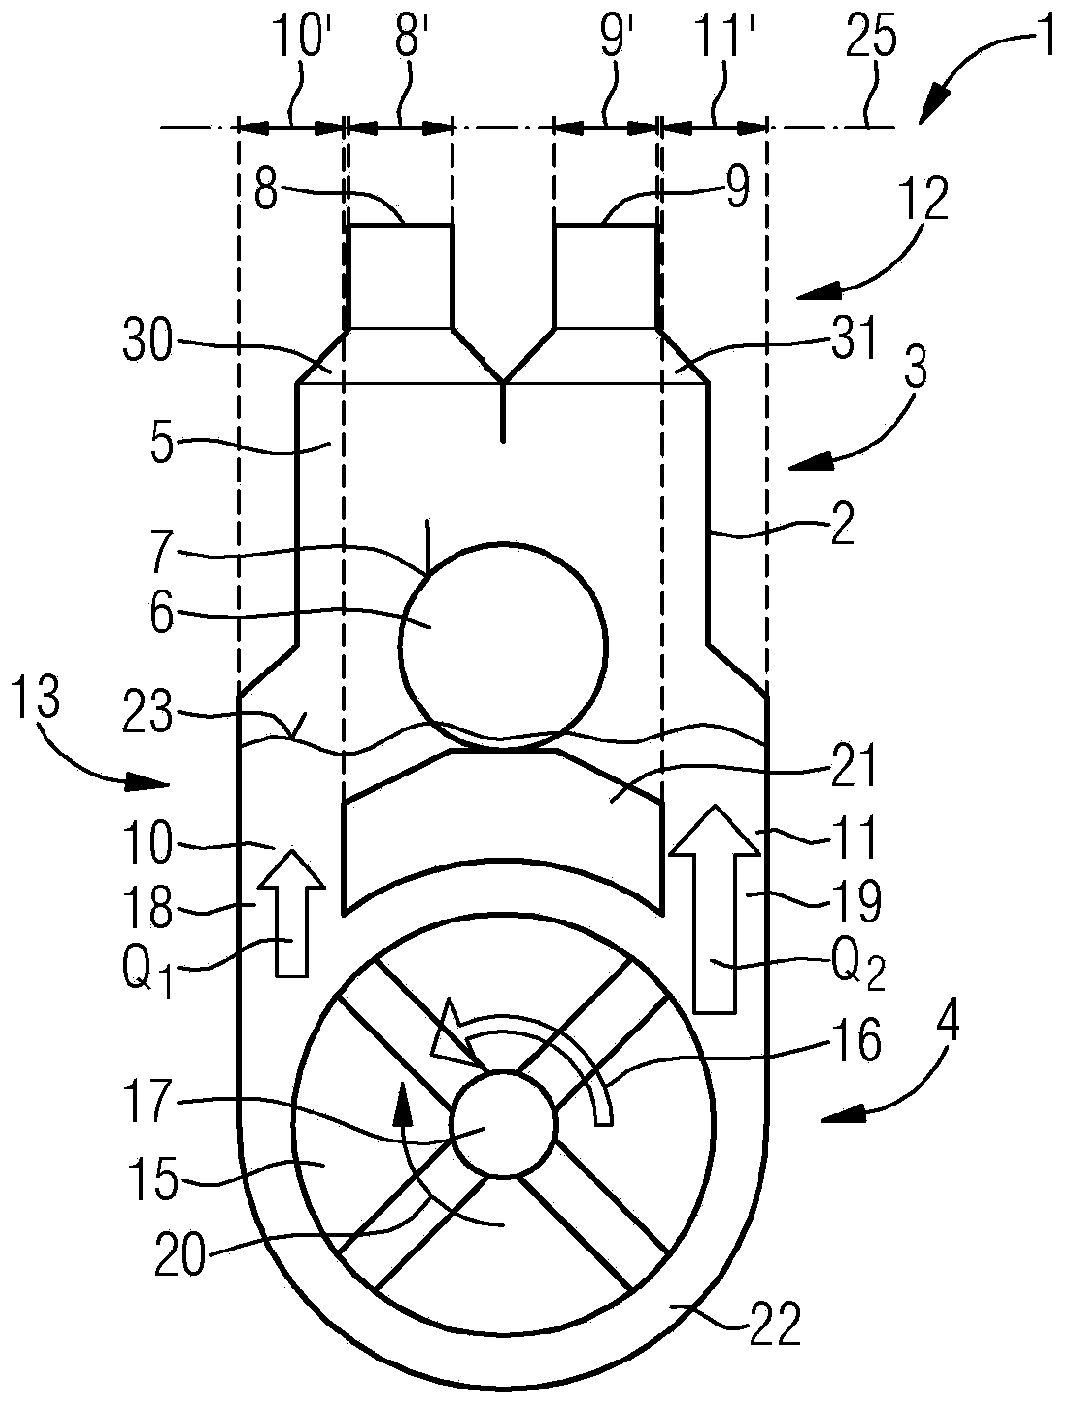 Change-over valve assemblies for water-conducting household appliances and water-conducting household appliances